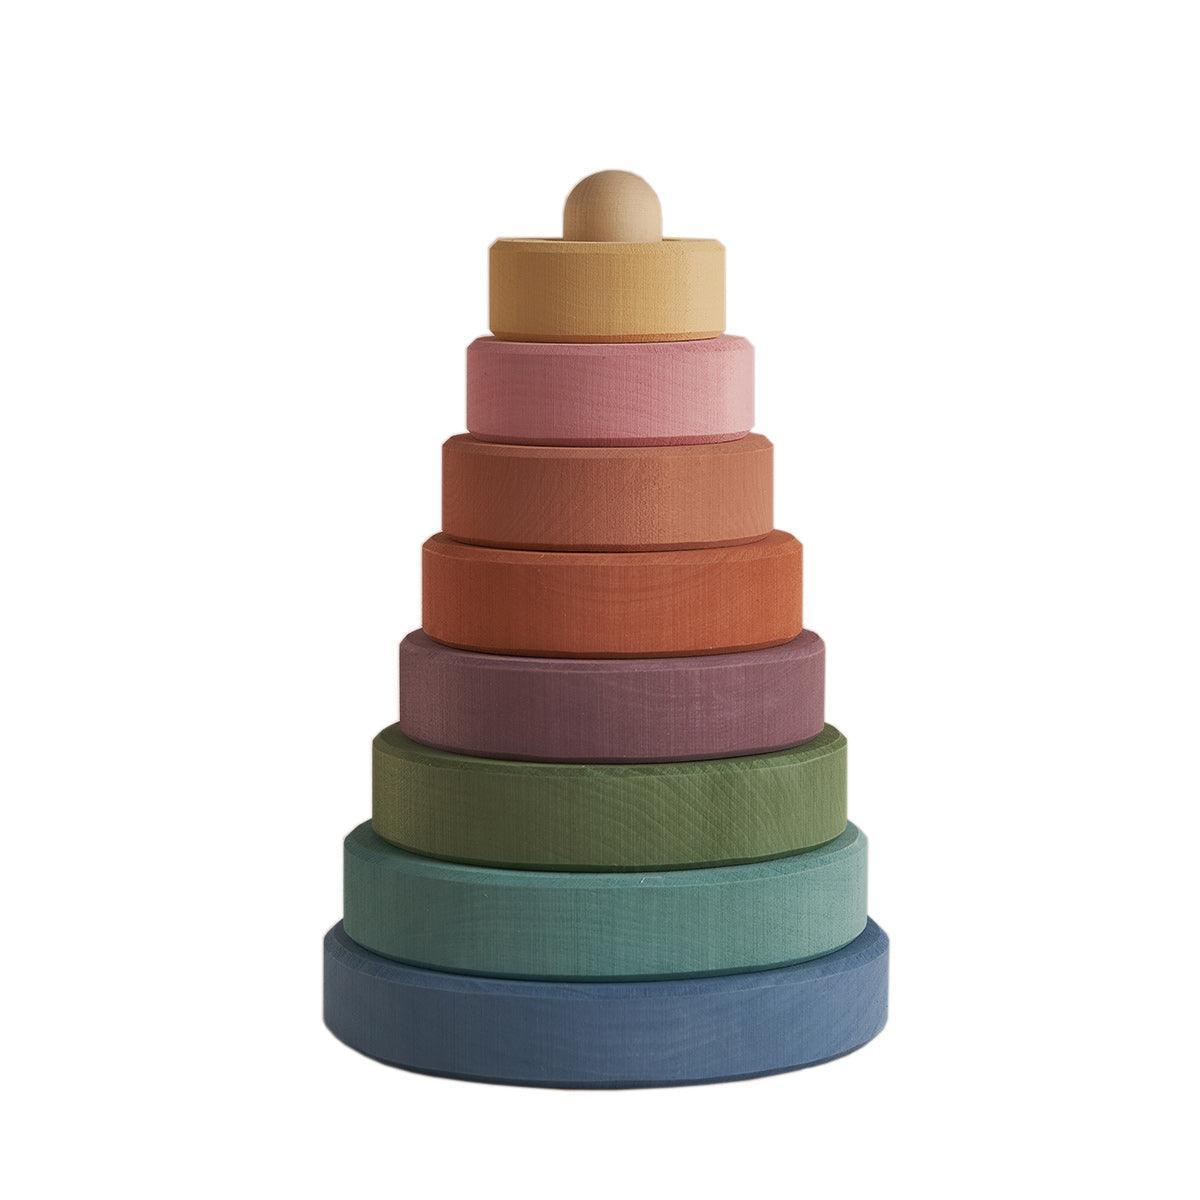 Pastel Earth stacking tower - Raduga Grez - Why and Whale